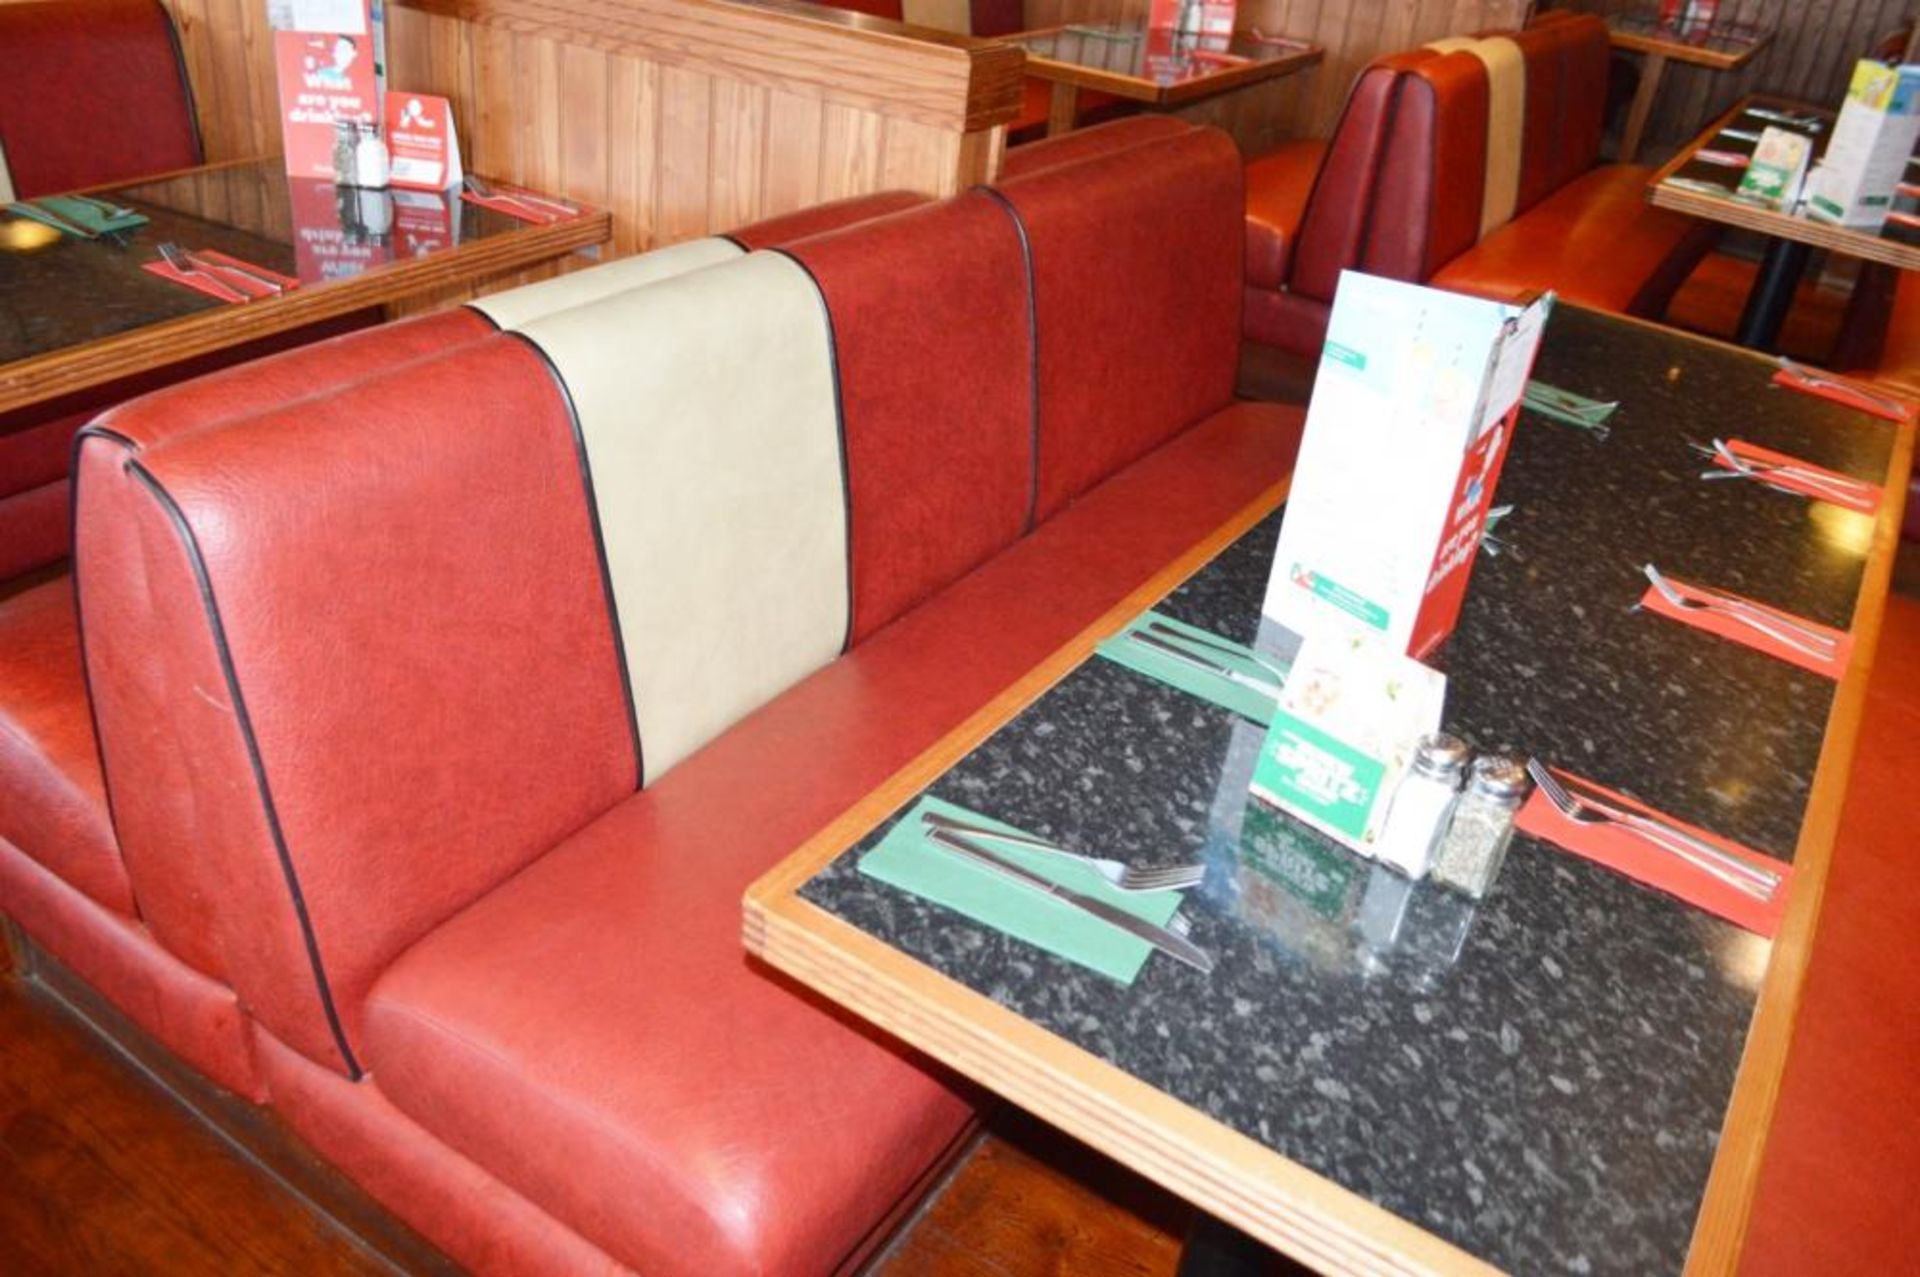 1 x Selection of Cosy Bespoke Seating Booths in a 1950's Retro American Diner Design With Dining Tab - Image 28 of 30